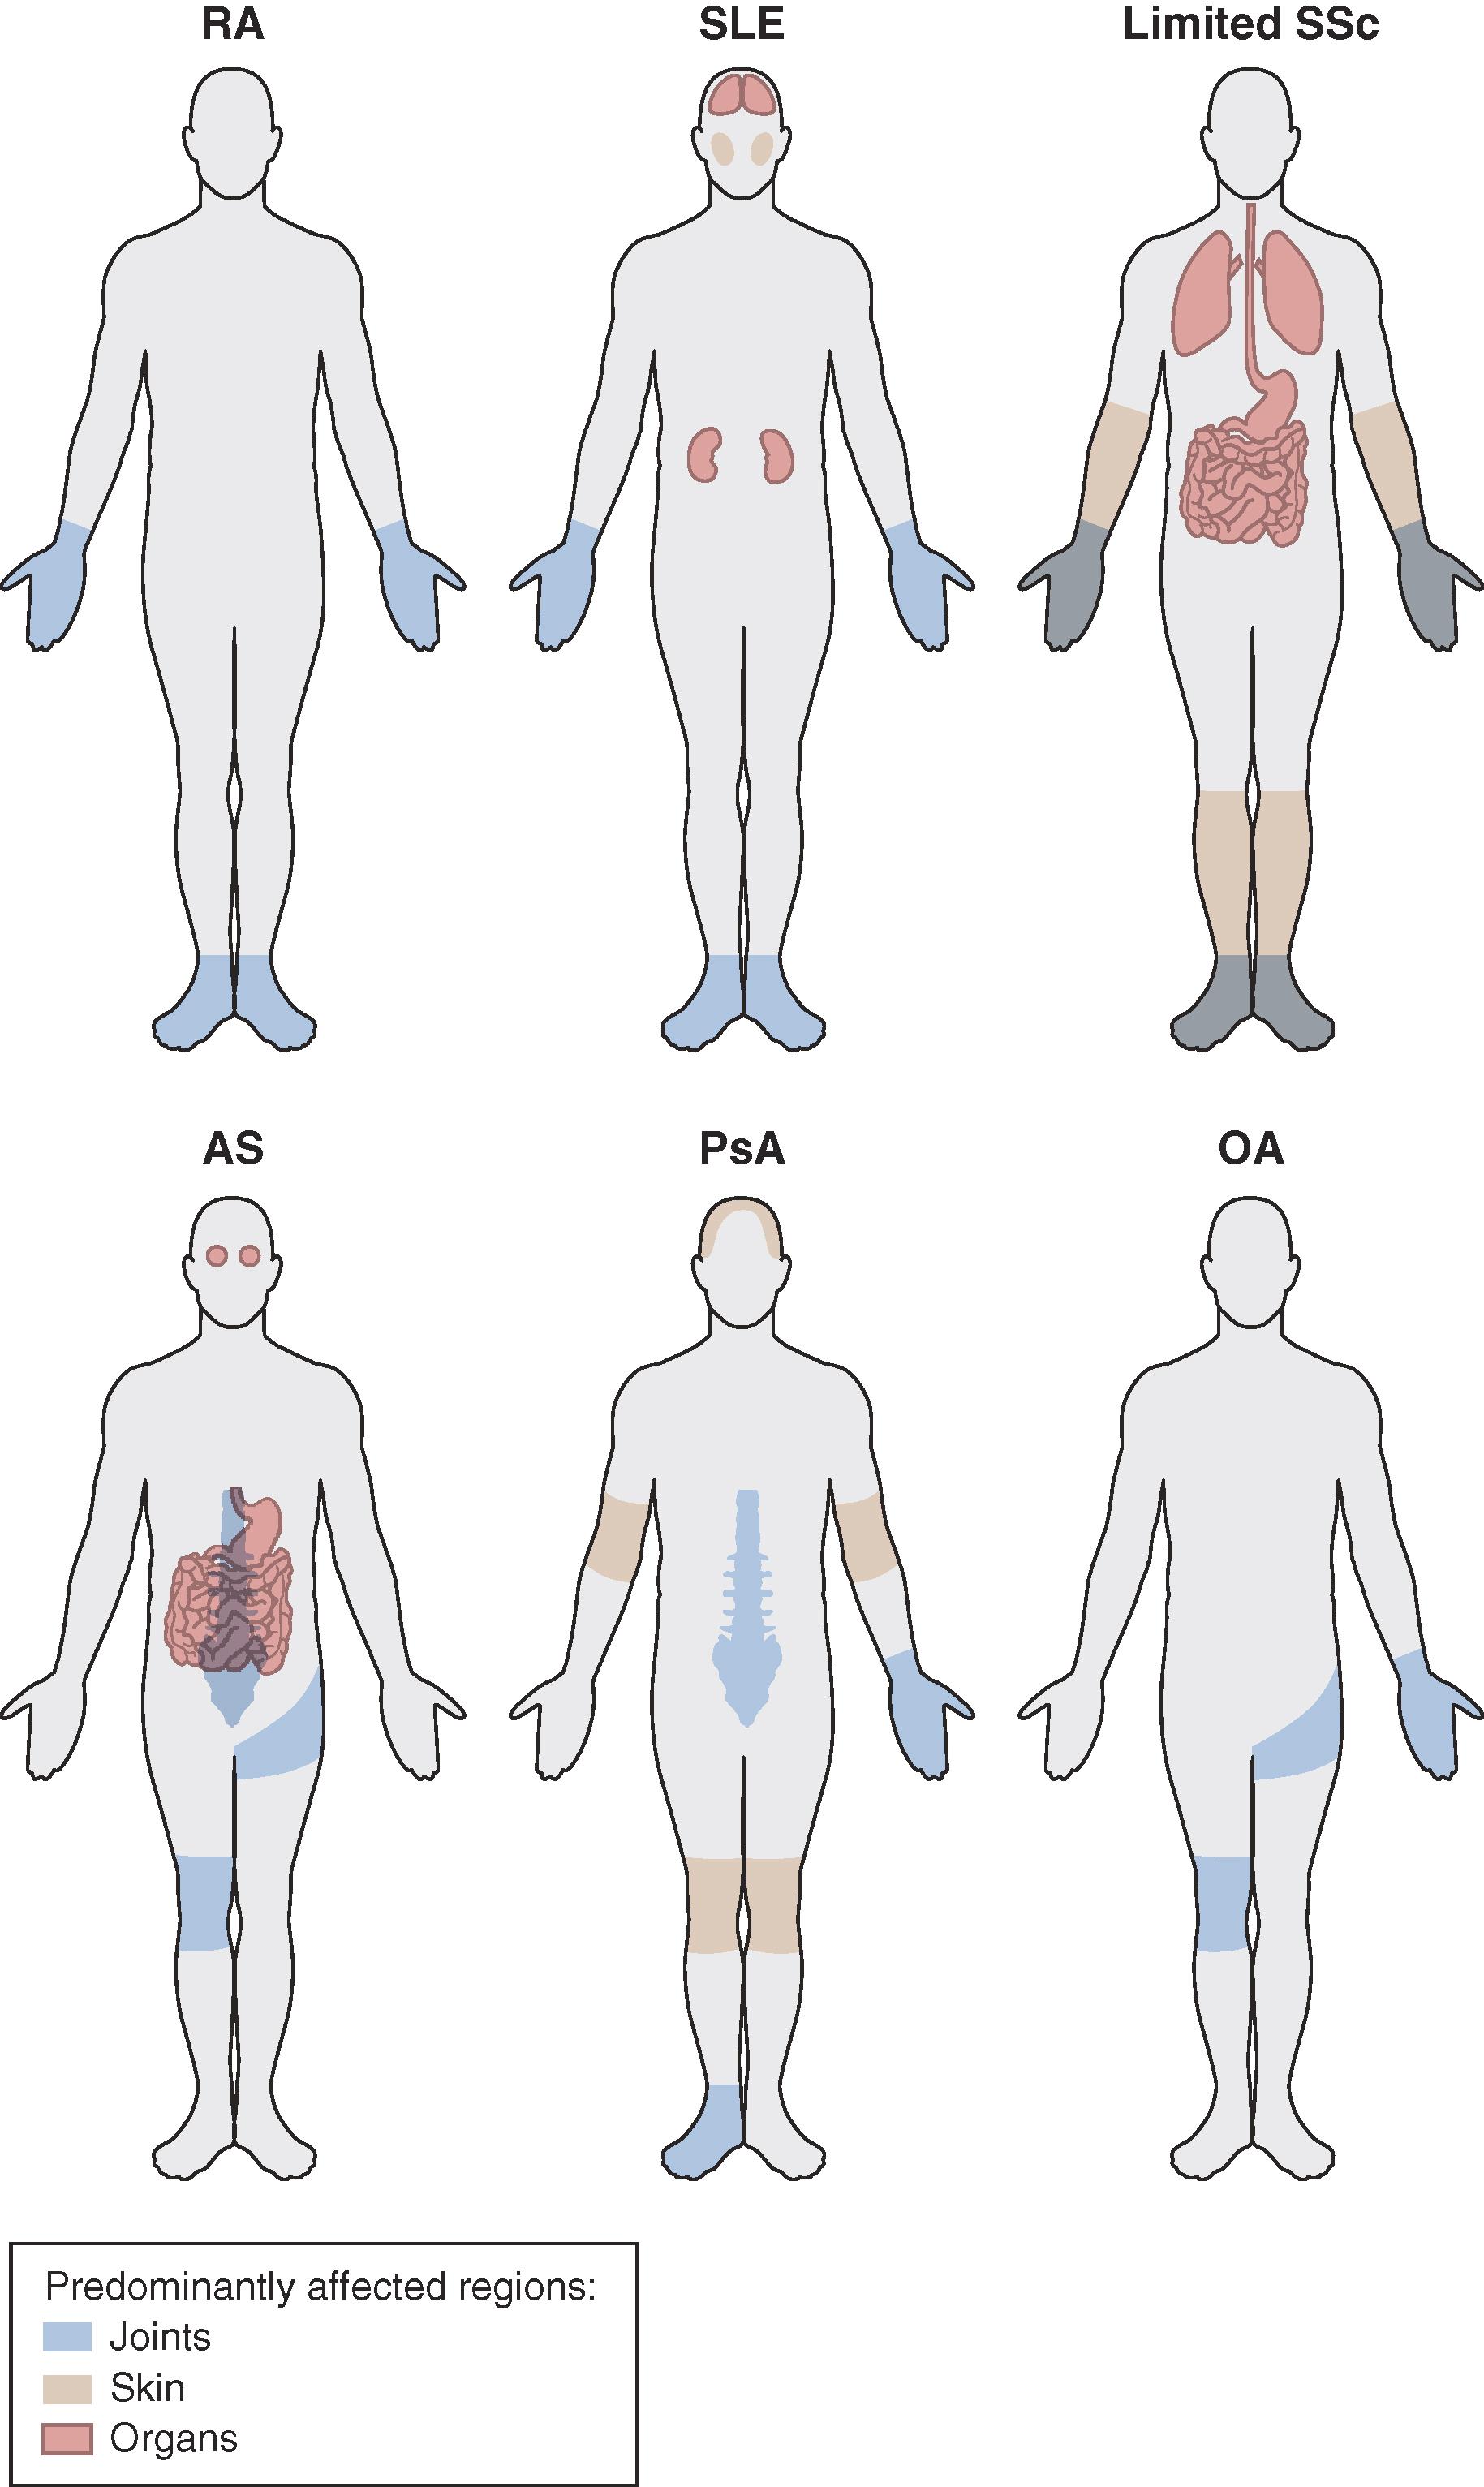 FIGURE 236-1, Patterns of joint and organ involvement in rheumatic disease.